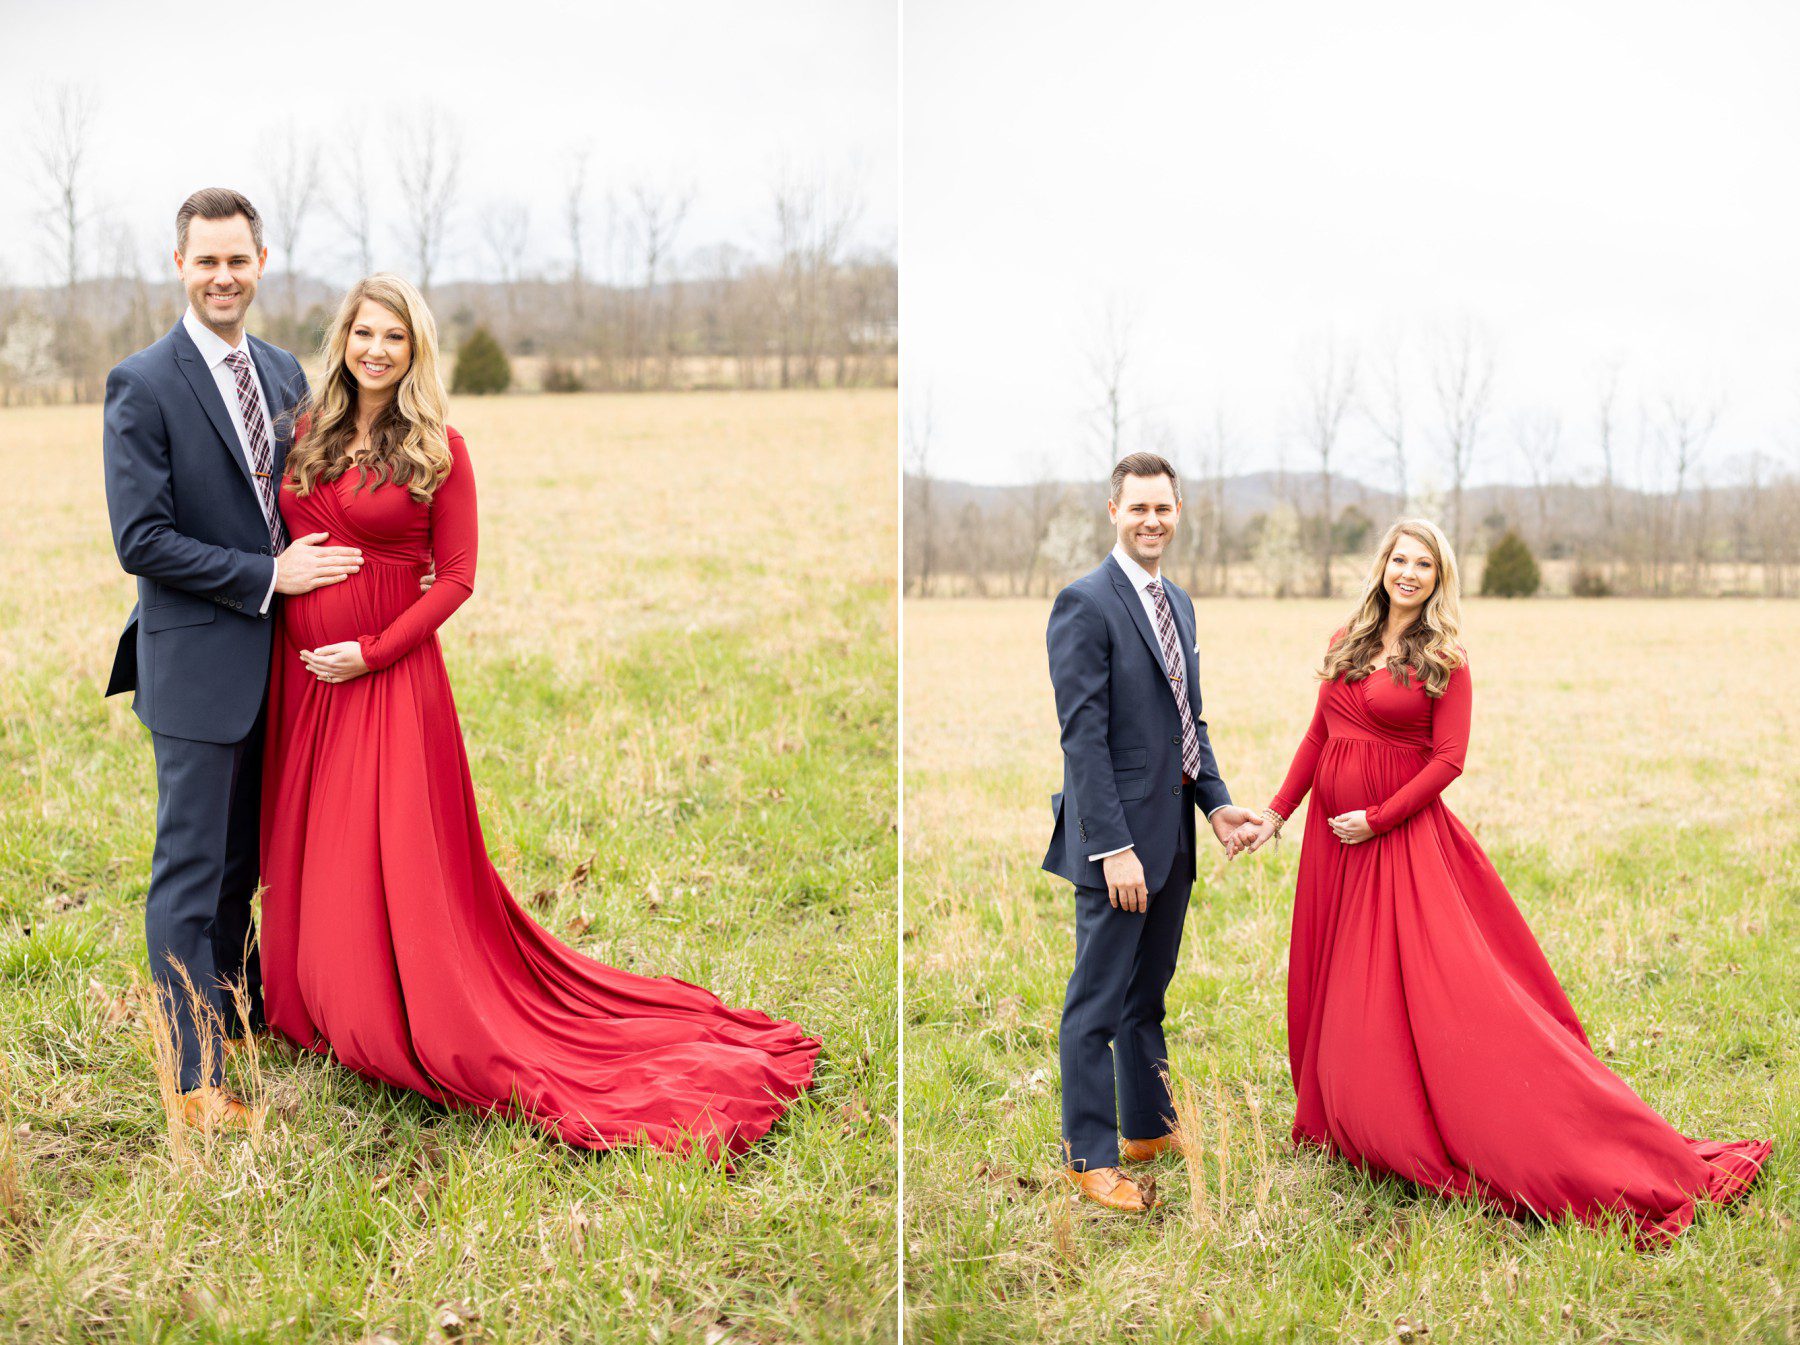 Maternity photo shoot with long red dress Mint Springs Farm Nolensville, TN